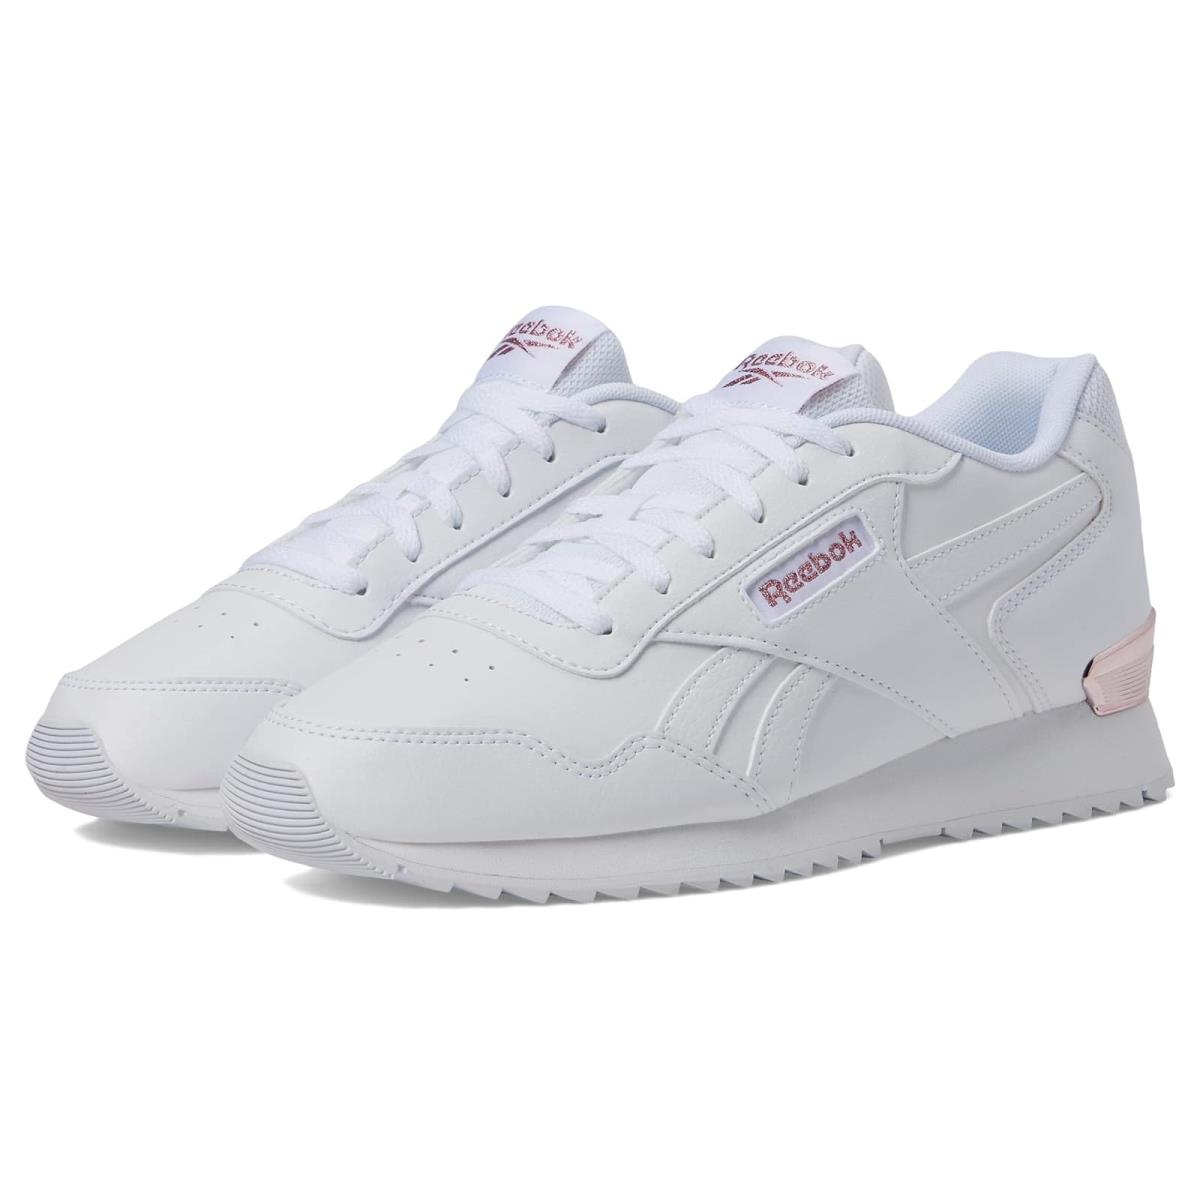 Woman`s Sneakers Athletic Shoes Reebok Glide Ripple Clip White/Rose Gold